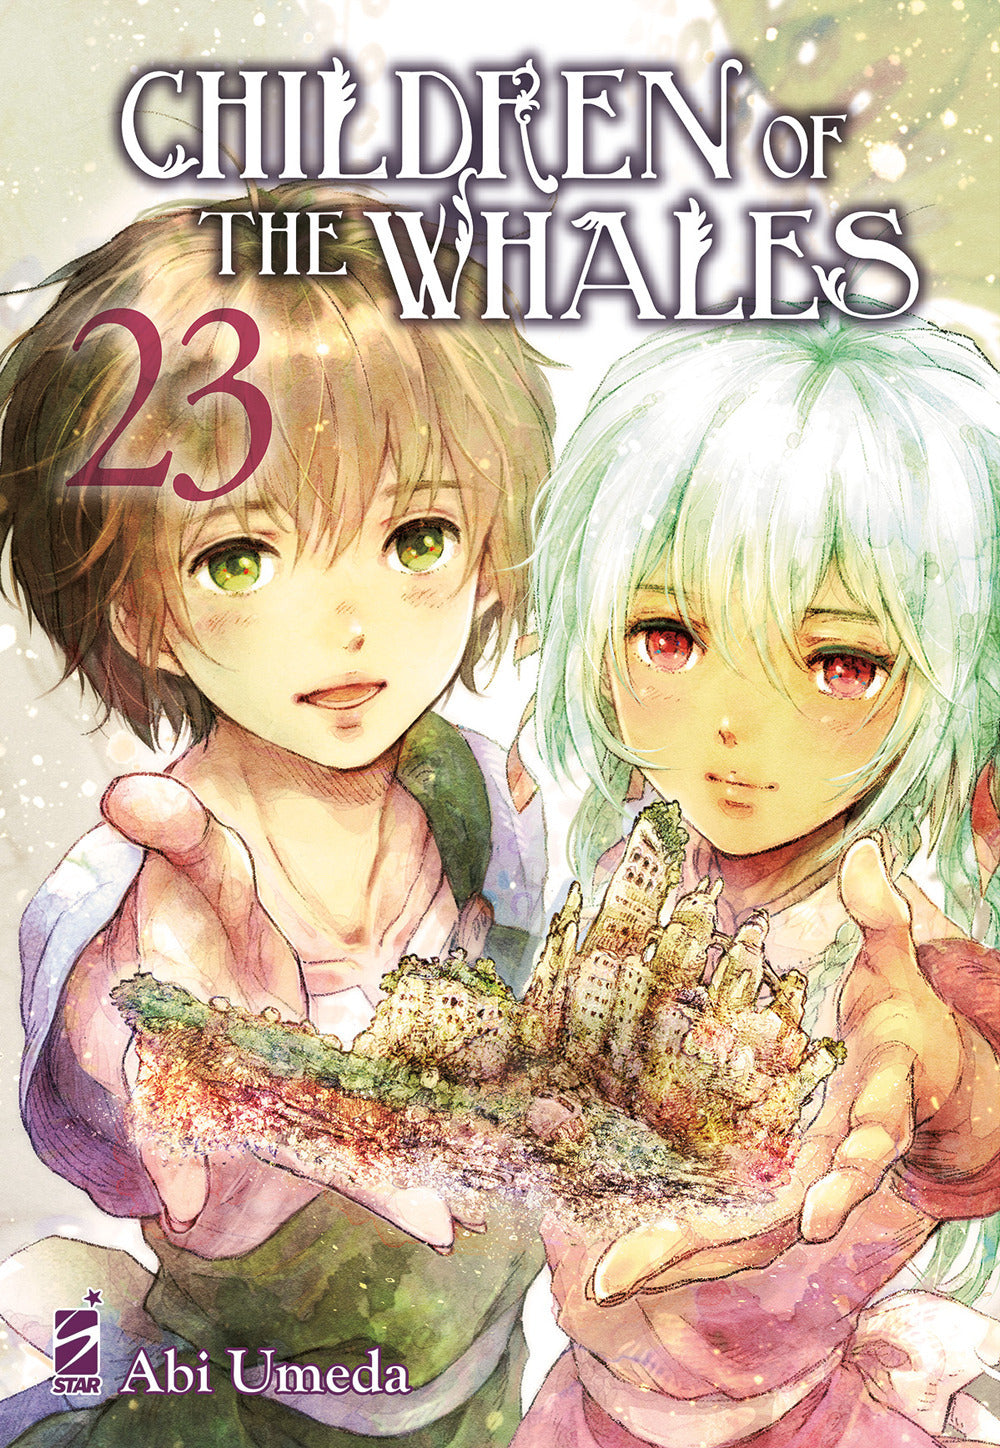 Children of the whales. Vol. 23